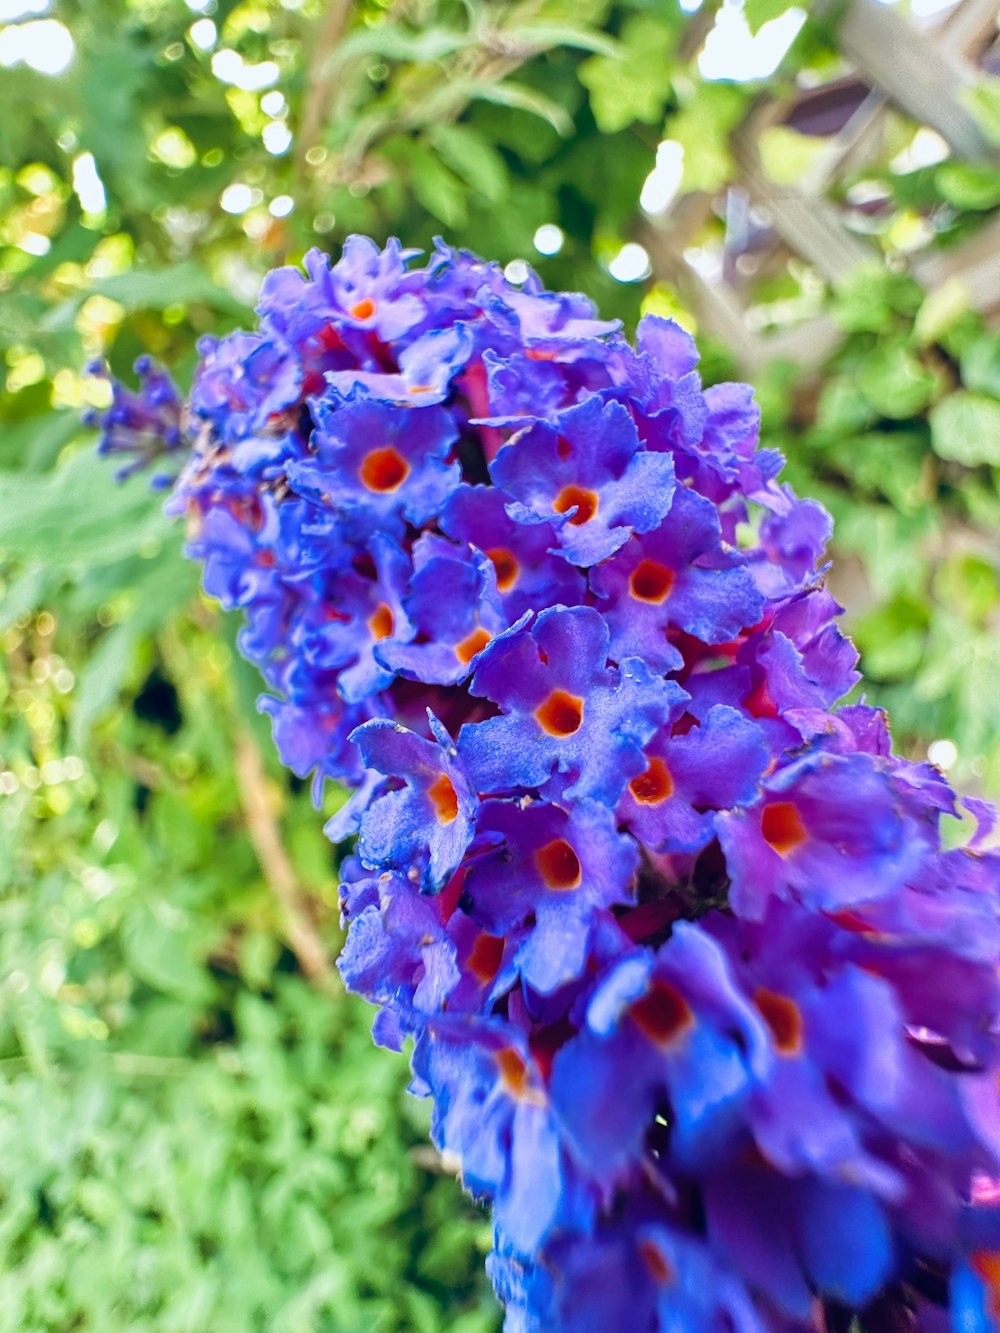 a close up of a purple flower in a garden